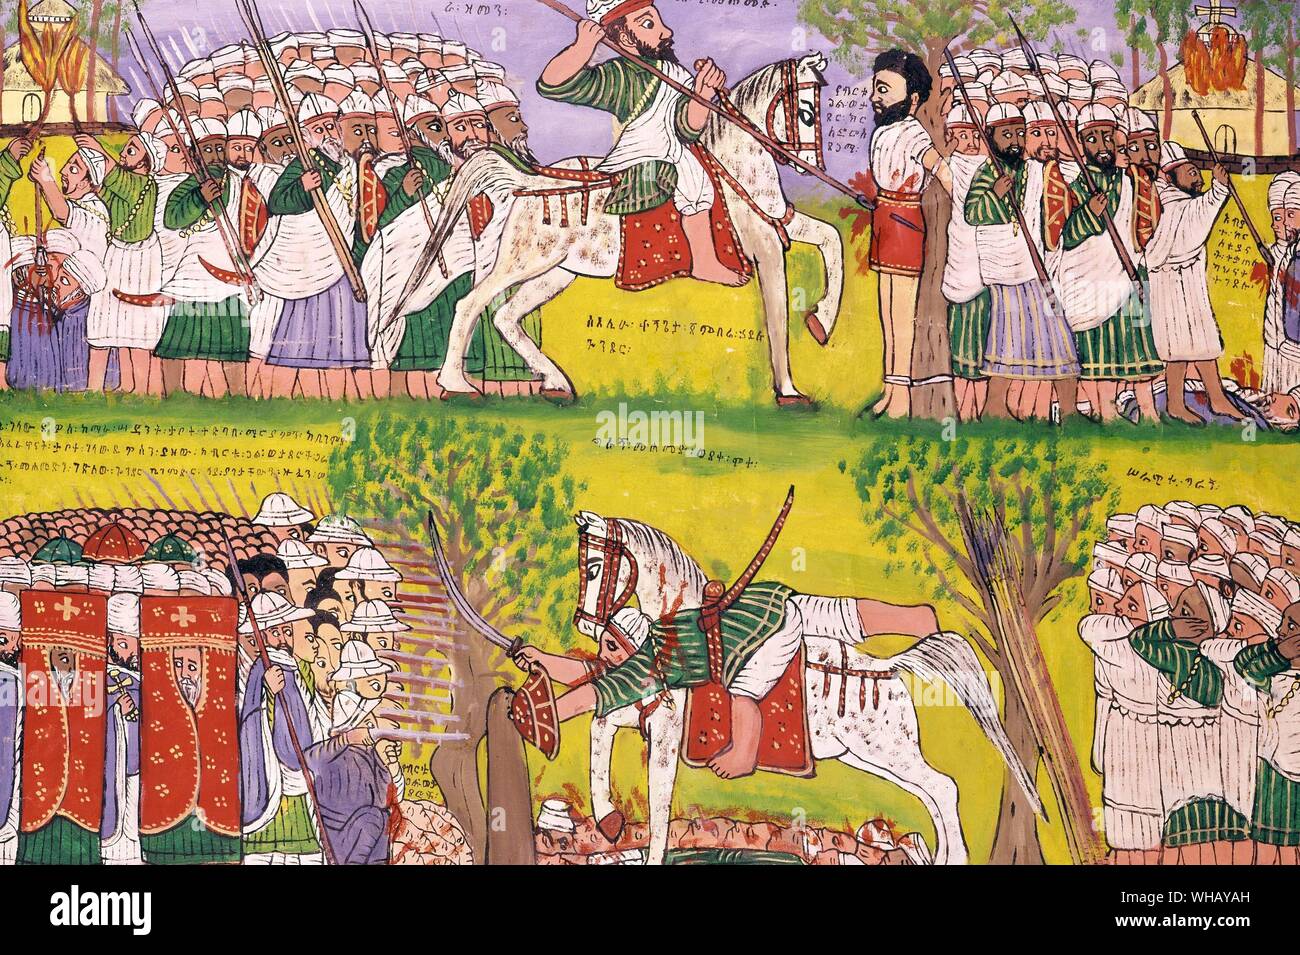 The fall and death of Ahmed Gran (1528-1540), shot by a Portuguese musketeer. Ahmed Gran was probably the fiercest Muslim warrior to battle the Christians in Ethiopia. He was a 16th century warrior whose powers were said to be miraculous. He was impervious to bullets, and his huge sword could severe a tree. He was killed by a combined Portuguese-Ethiopian army. Wooden panel painted at the beginning of this century by Kegneketa Jemlieri Hailu of Gondar. The African Adventure - A History of Africa's Explorers by Timothy Severin, page 49. Stock Photo